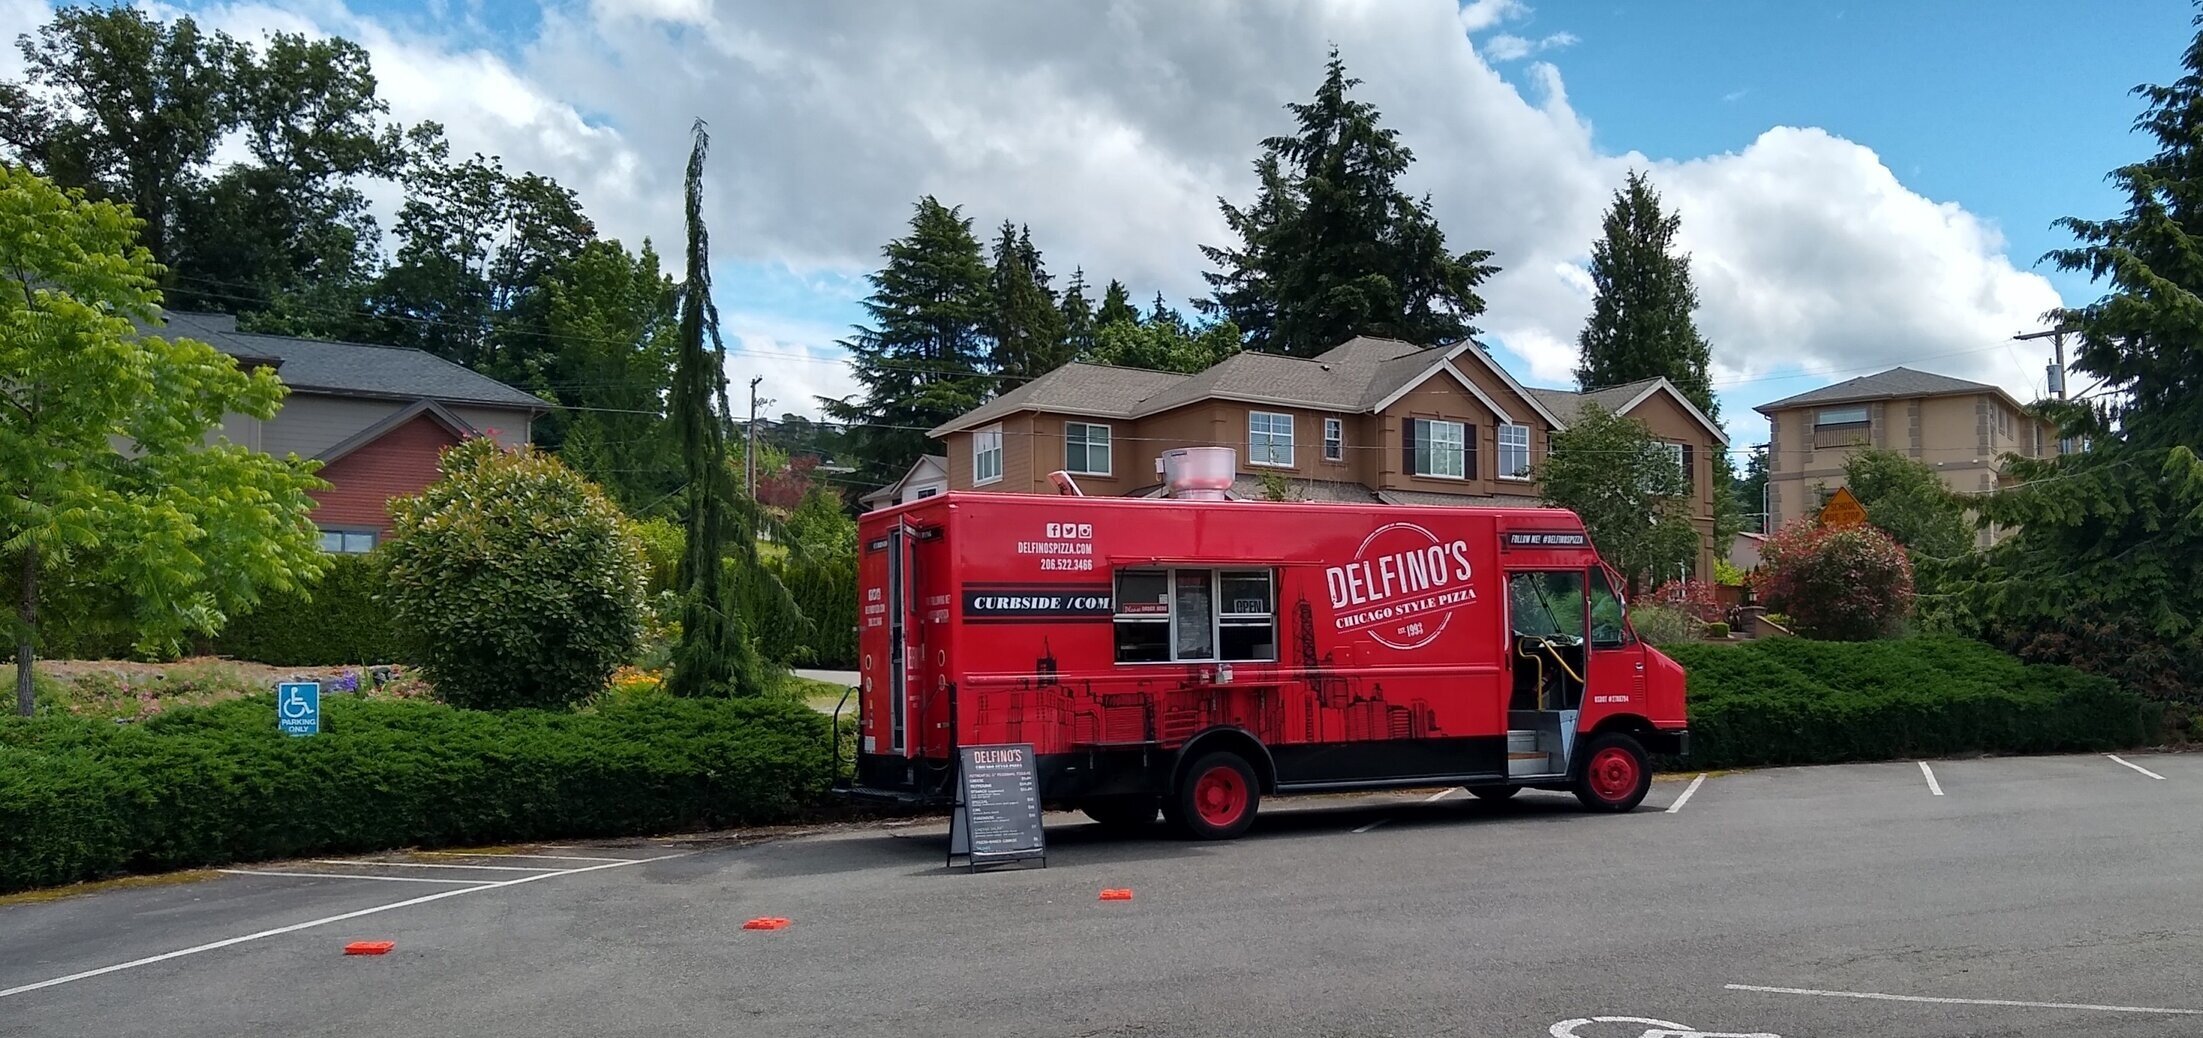  Photo:  Bright red food truck without any customers.  